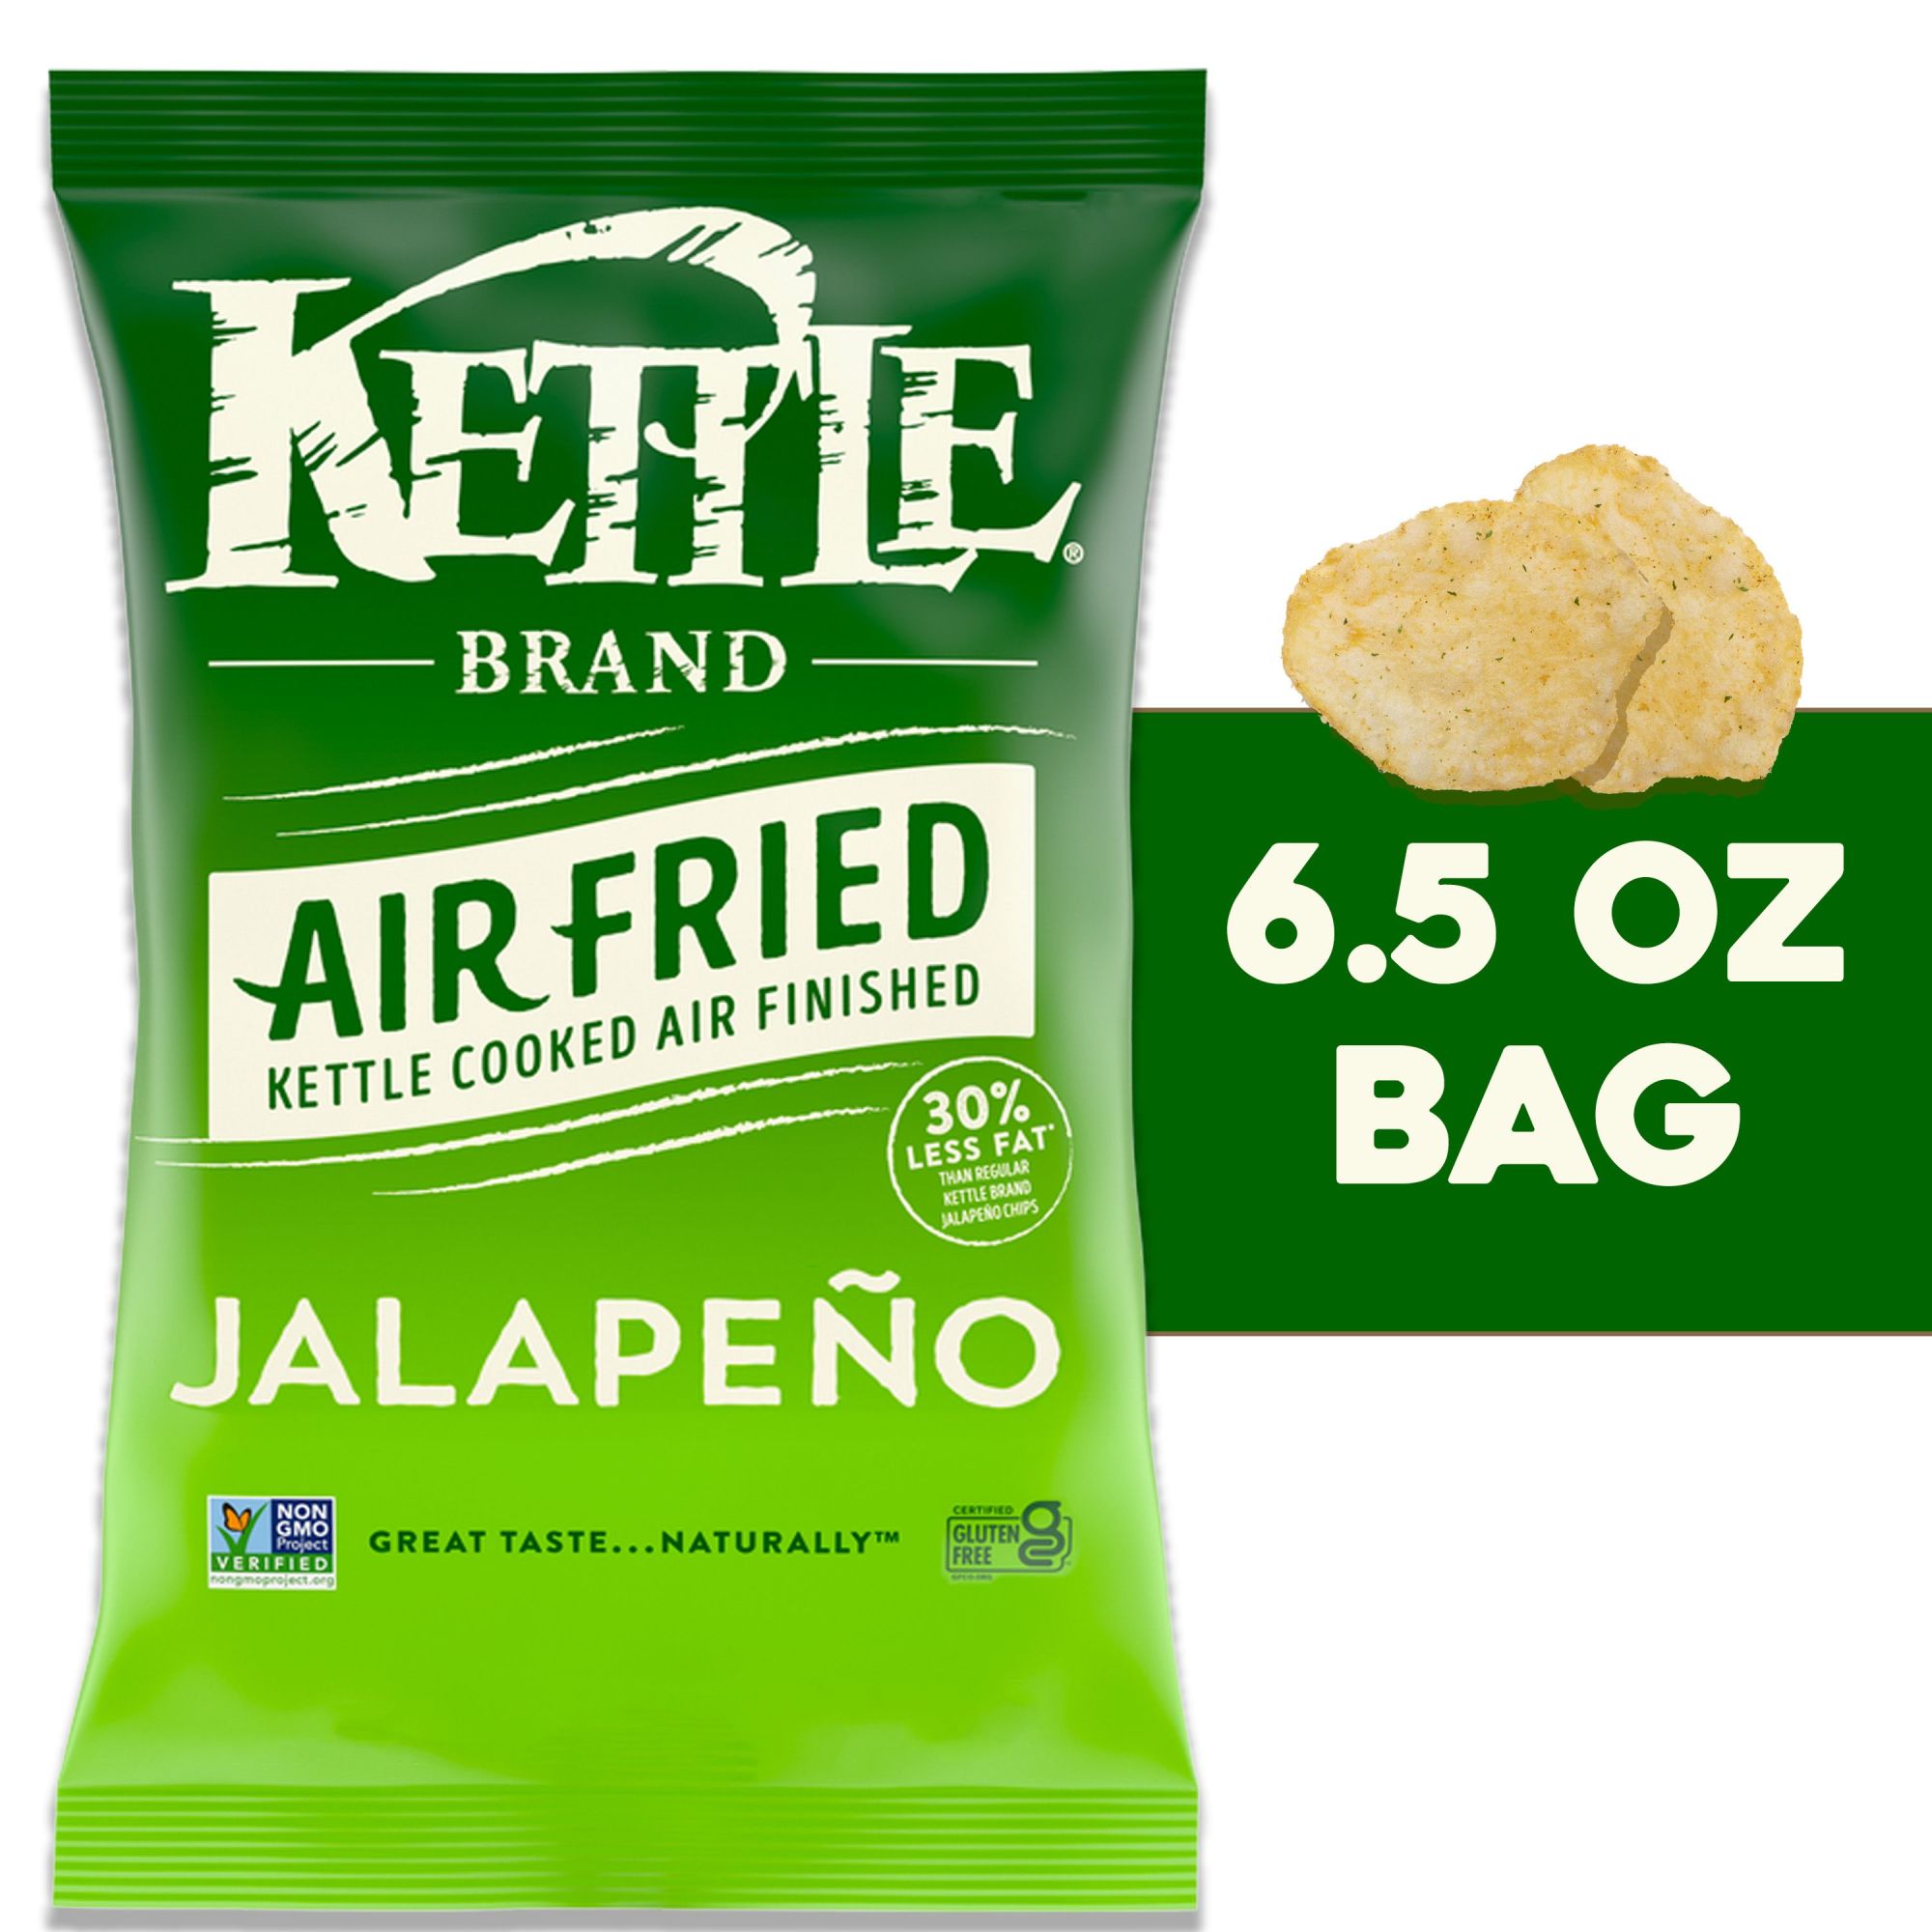 Kettle Brand Potato Chips, Air Fried Jalapeno Kettle Chips, 6.5 oz Bag, Size: 13.000 x 8.500 x 3.000 in